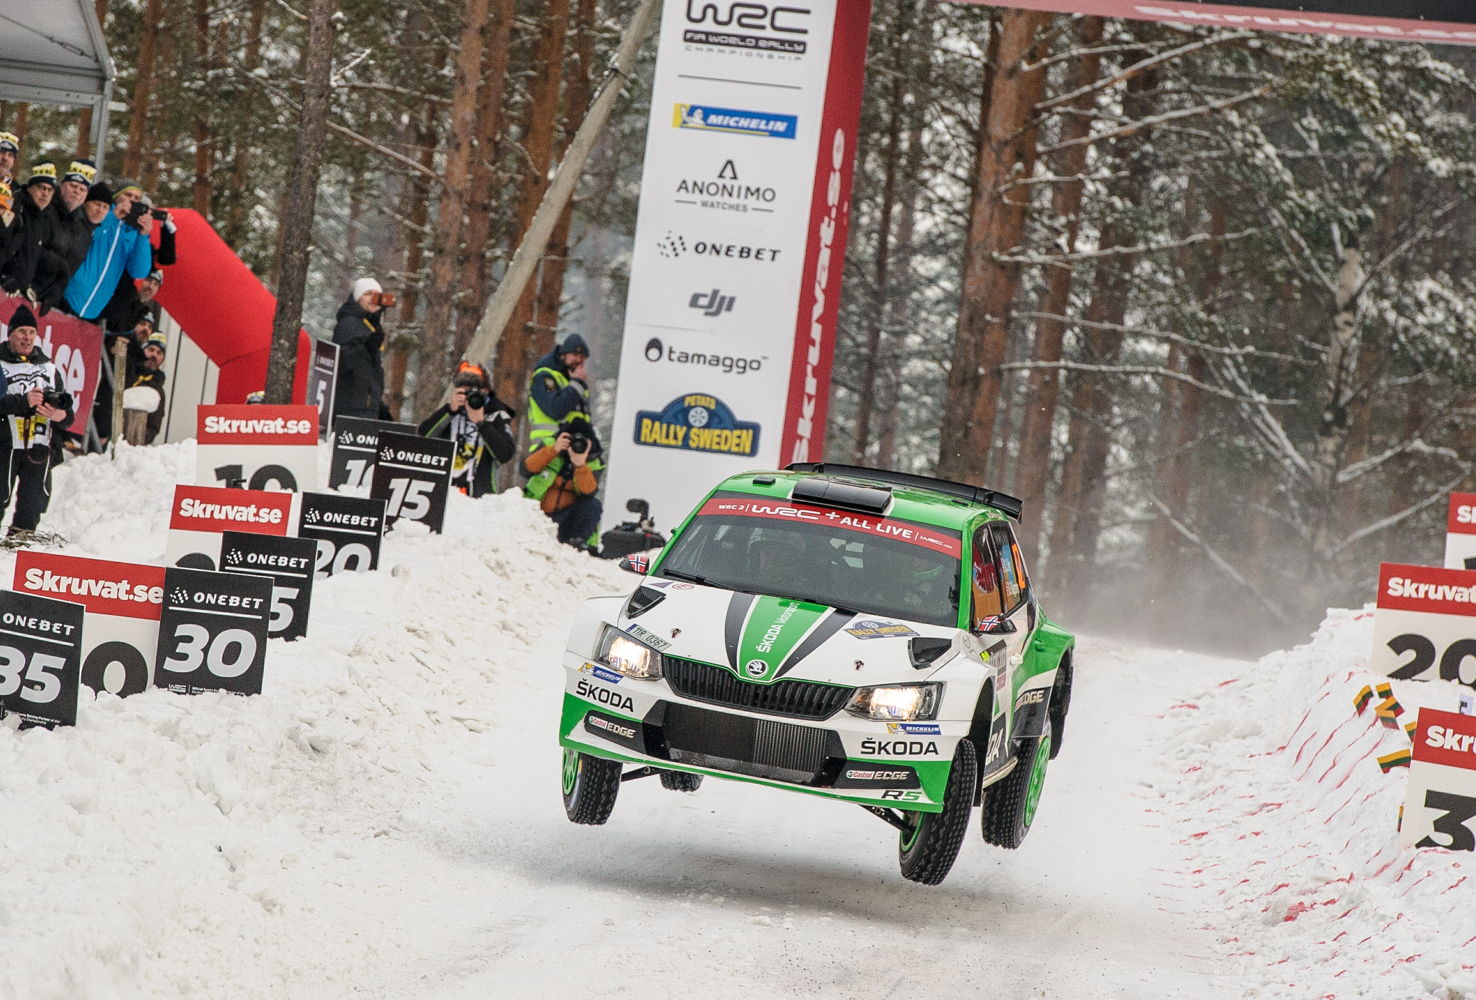 At the second round of 2018 FIA World Rally Championship (WRC), Ole Christian Veiby and co-driver Stig Rune Skjærmoen (ŠKODA FABIA R5) took third position in the WRC 2 category